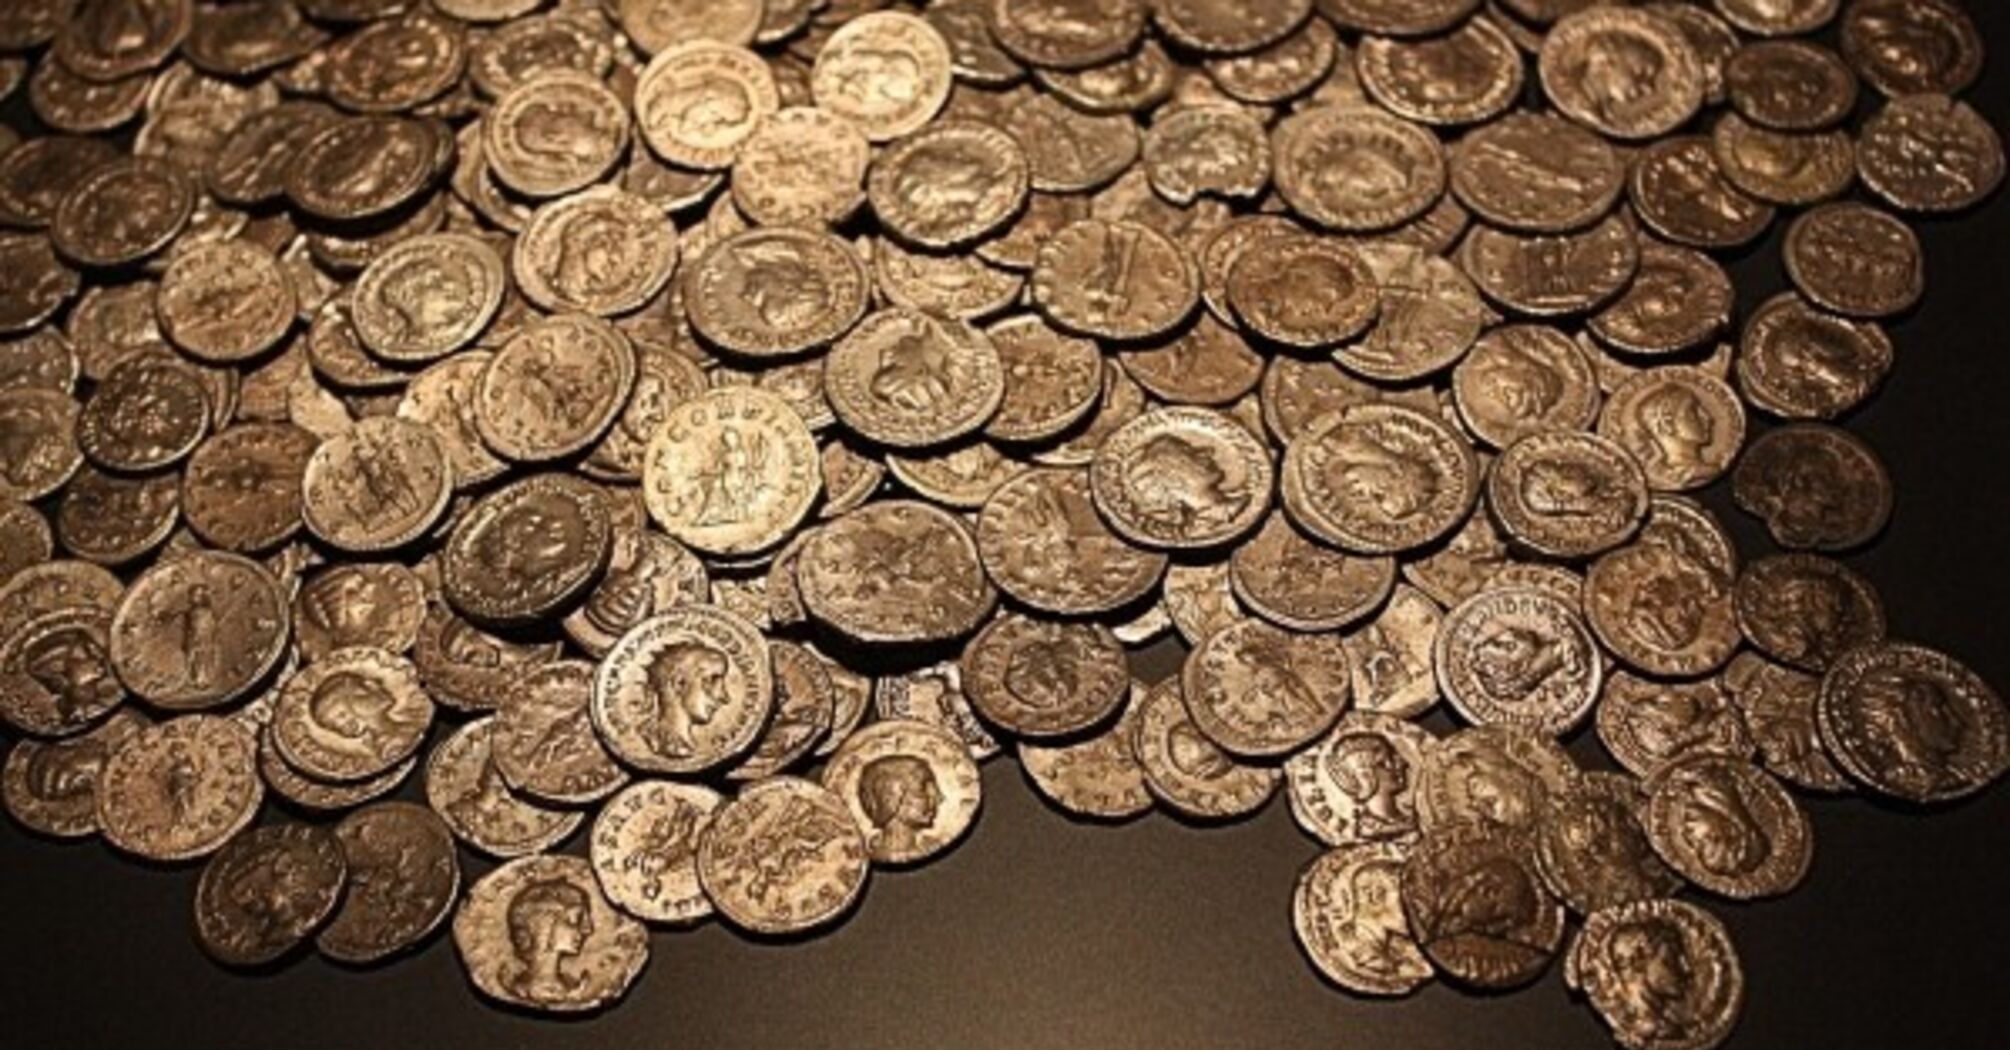 Centuries-old coins found in Germany